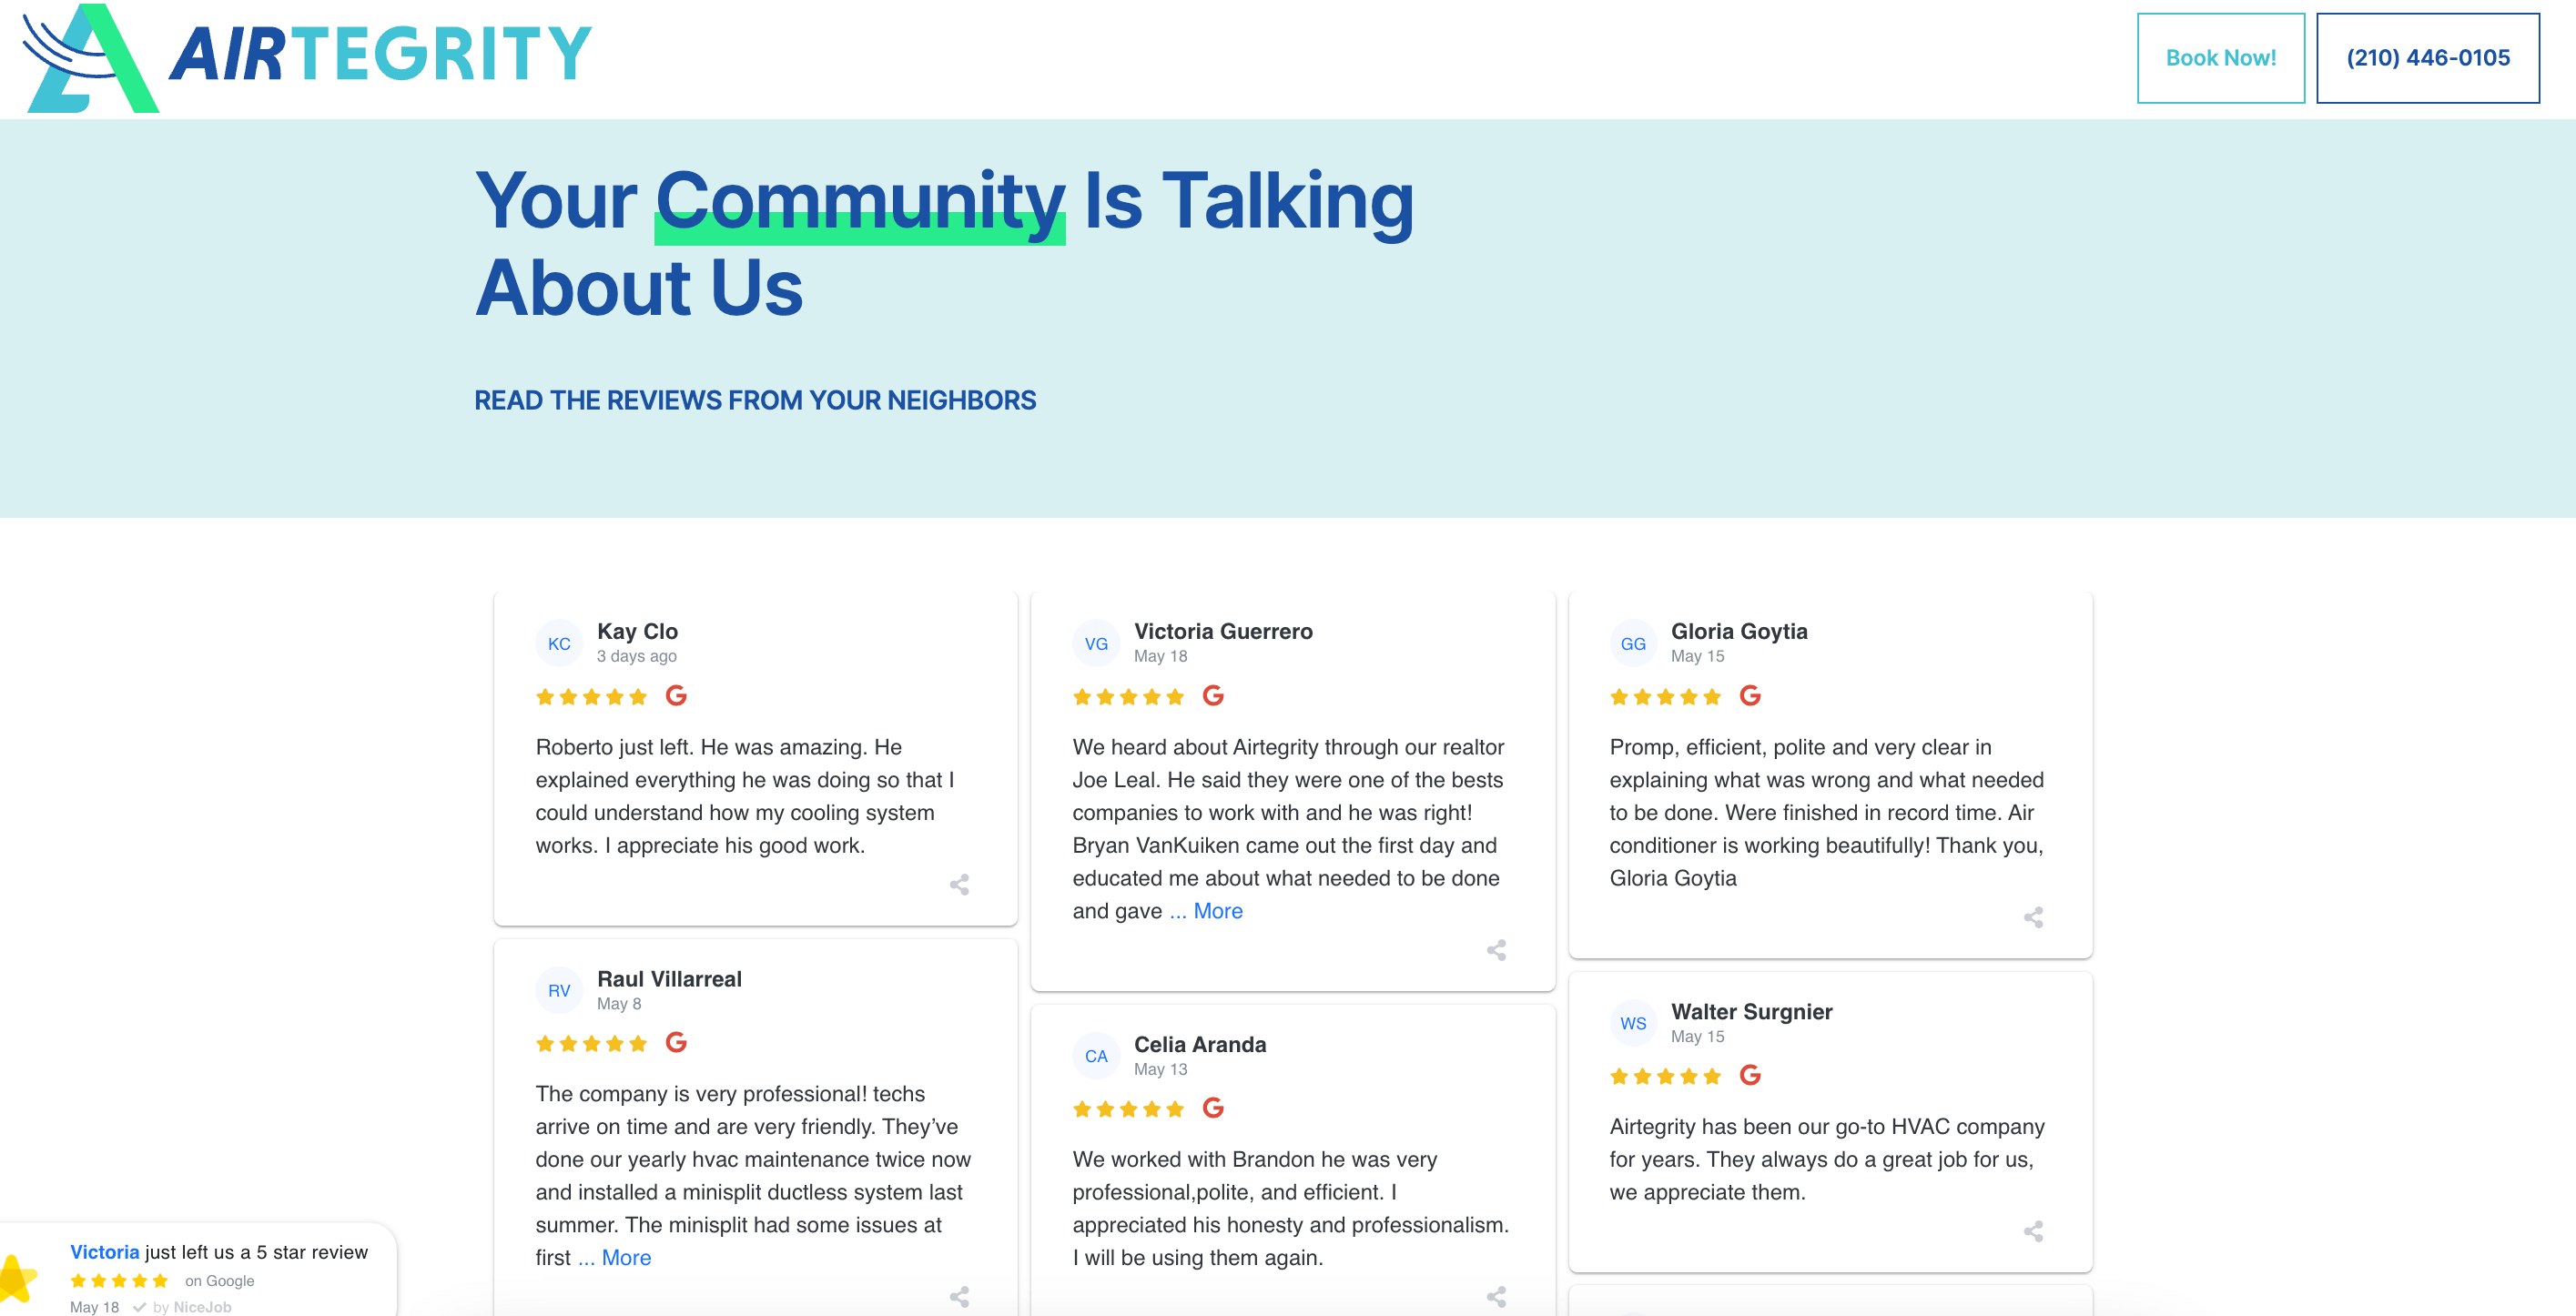 Local content marketing example of Airtegrity's reviews page.